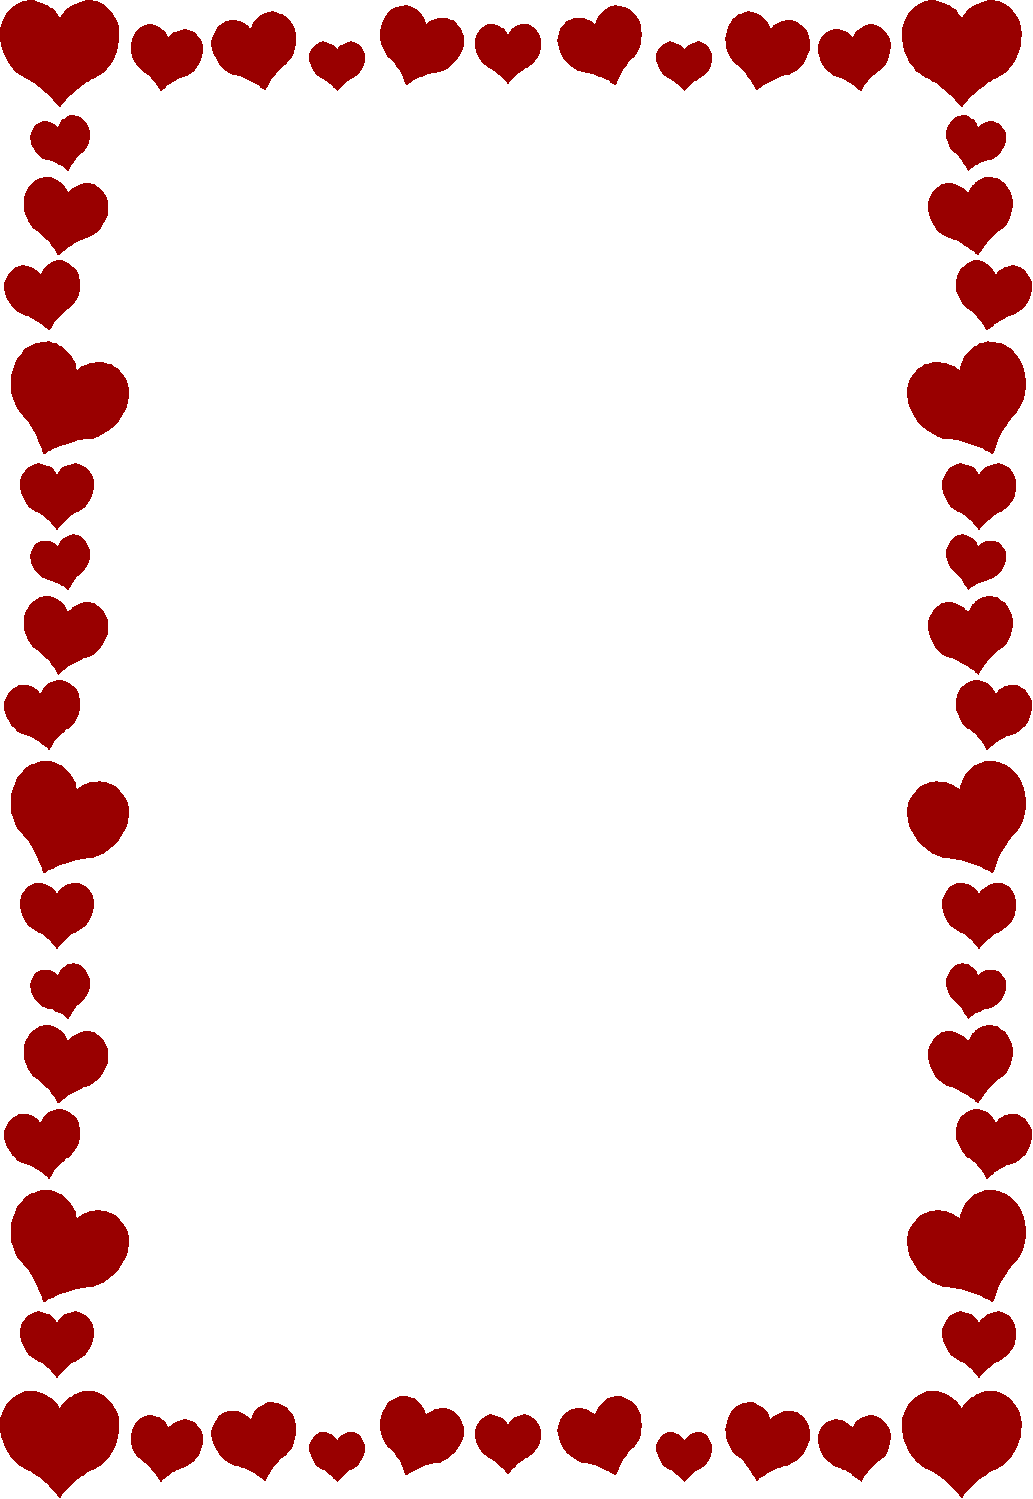 Heart Border For Word | Free Download Clip Art | Free Clip Art ...